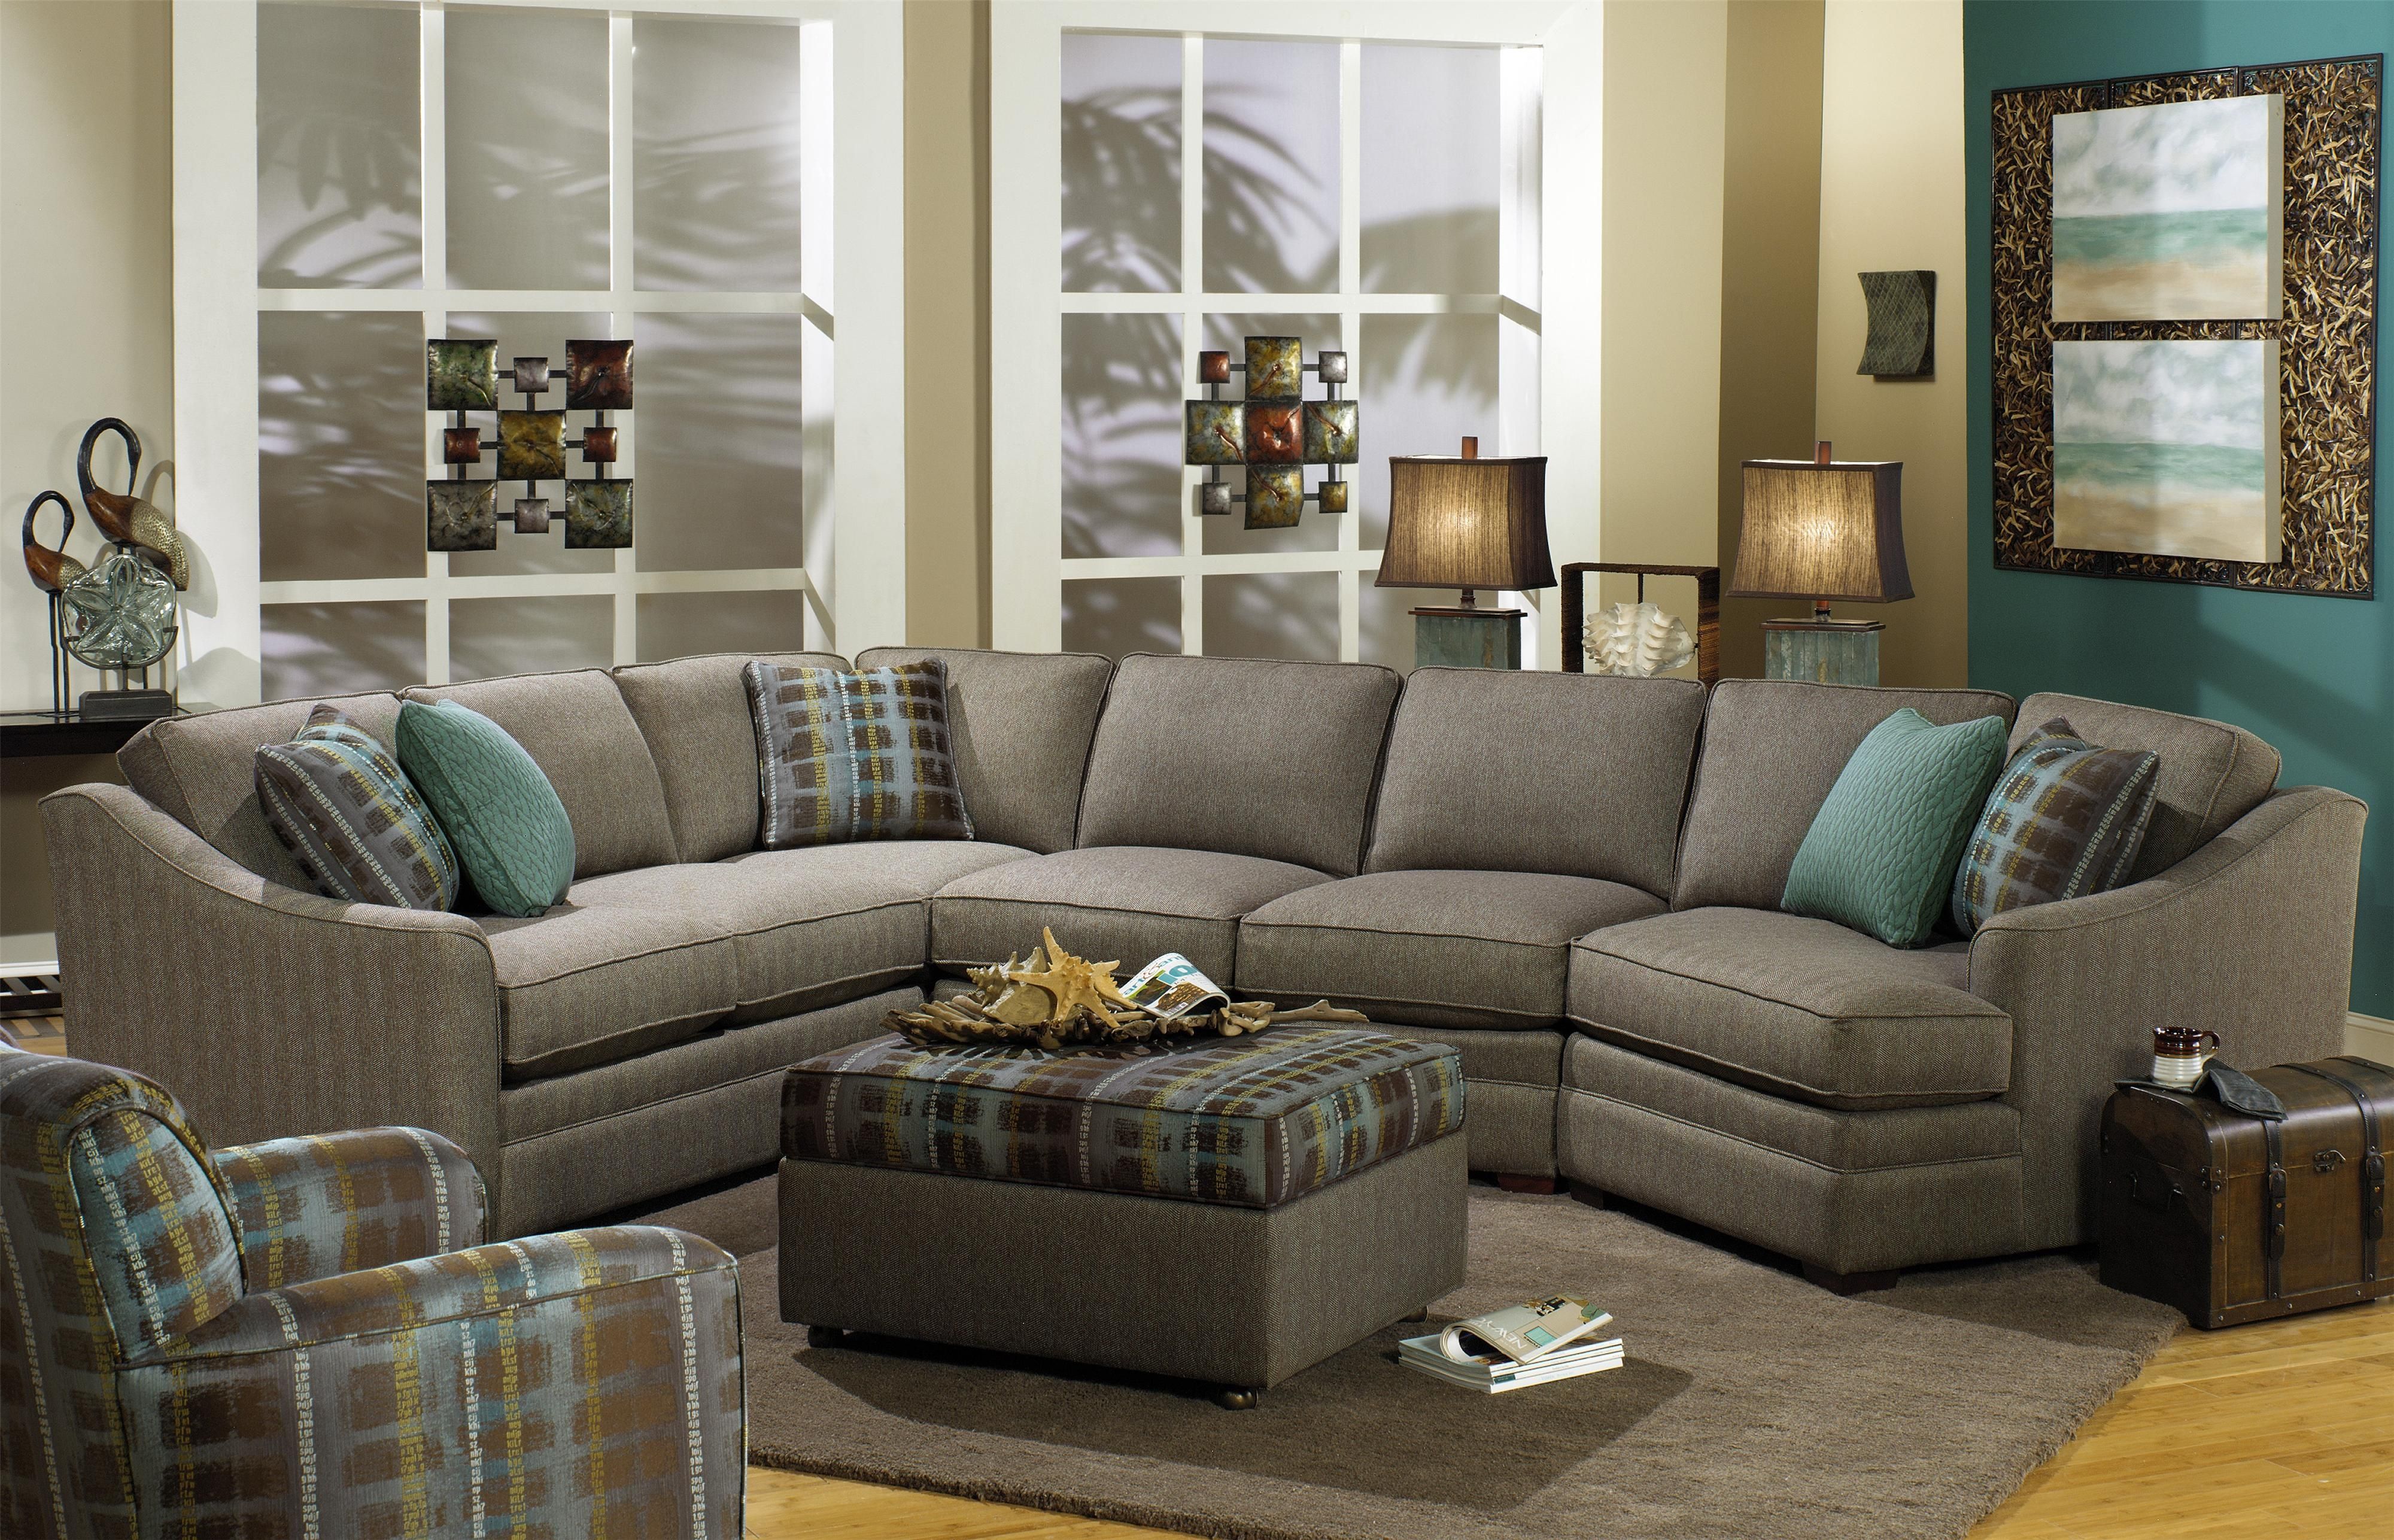 Craftmaster F9 Custom Collection Customizable 3 Piece Sectional Intended For Craftsman Sectional Sofa (View 5 of 12)